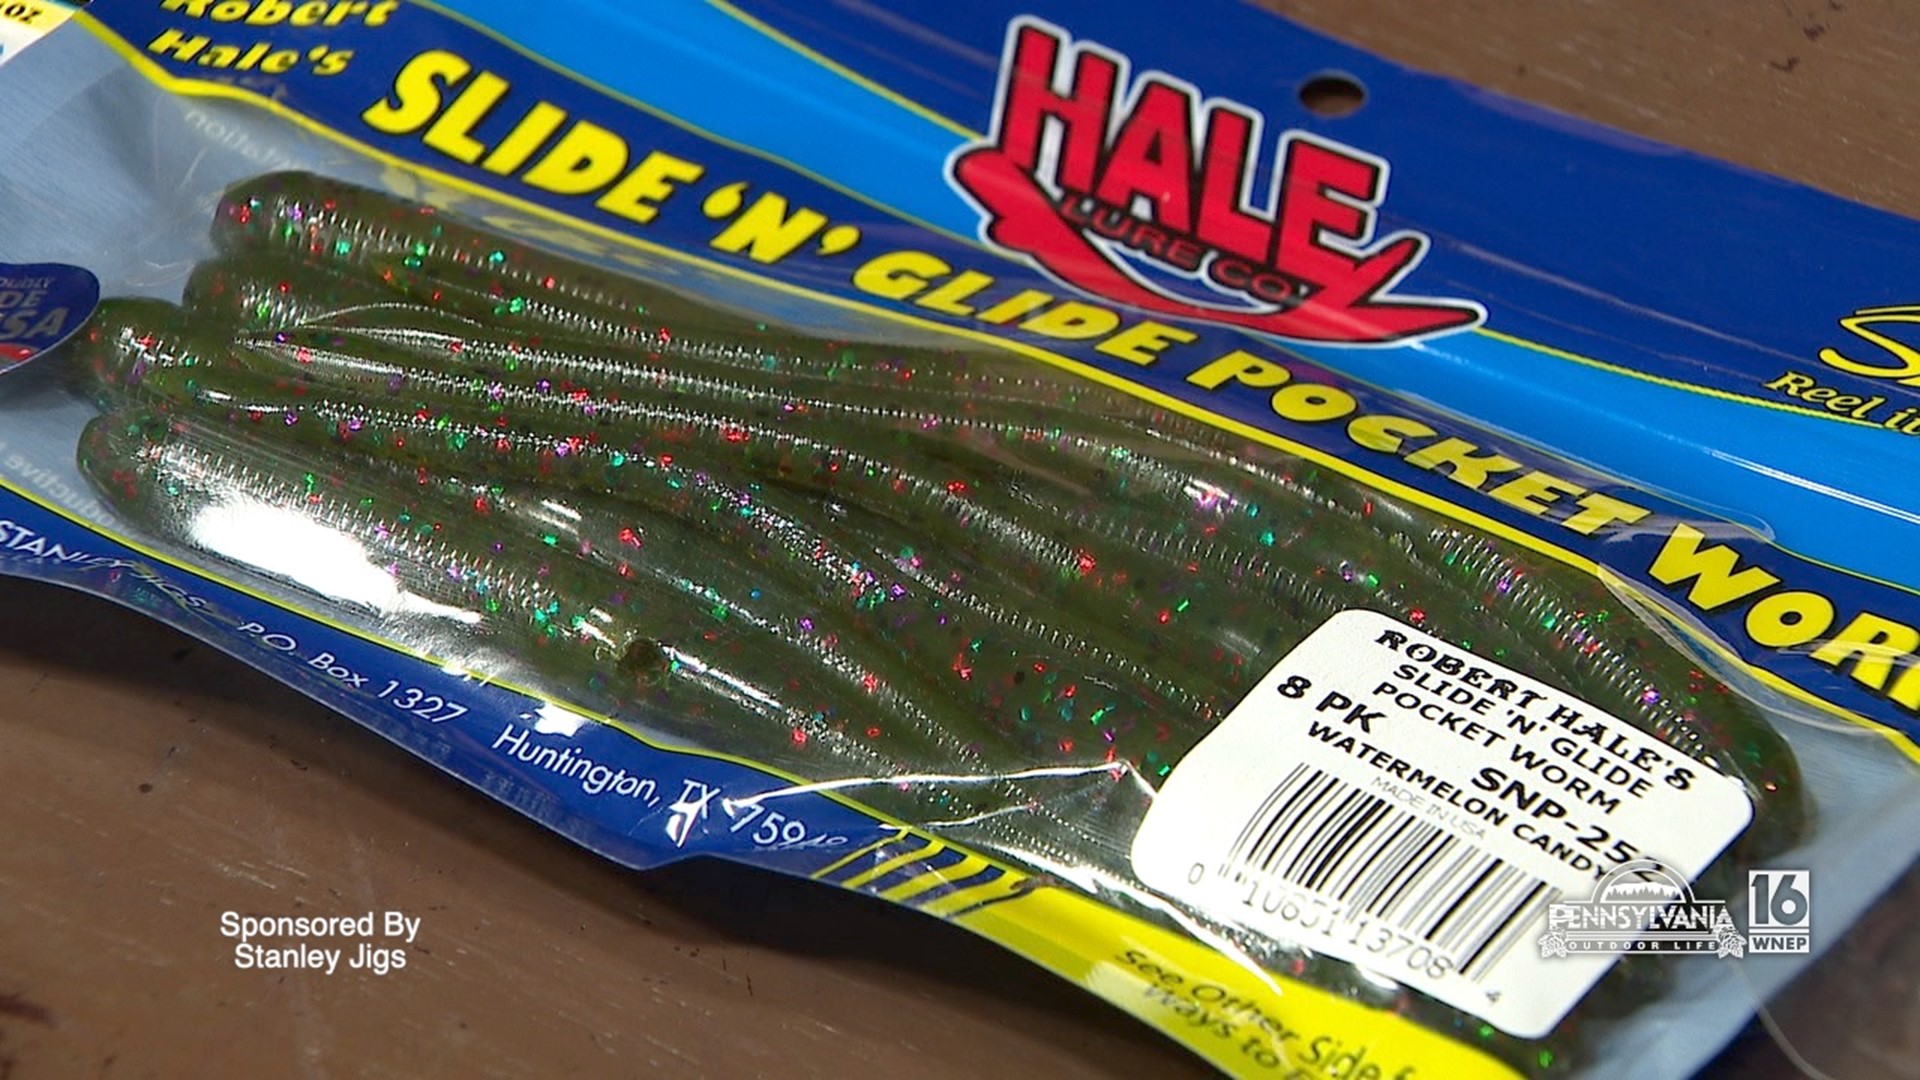 Lures guaranteed to increase your odds of landing the big one.